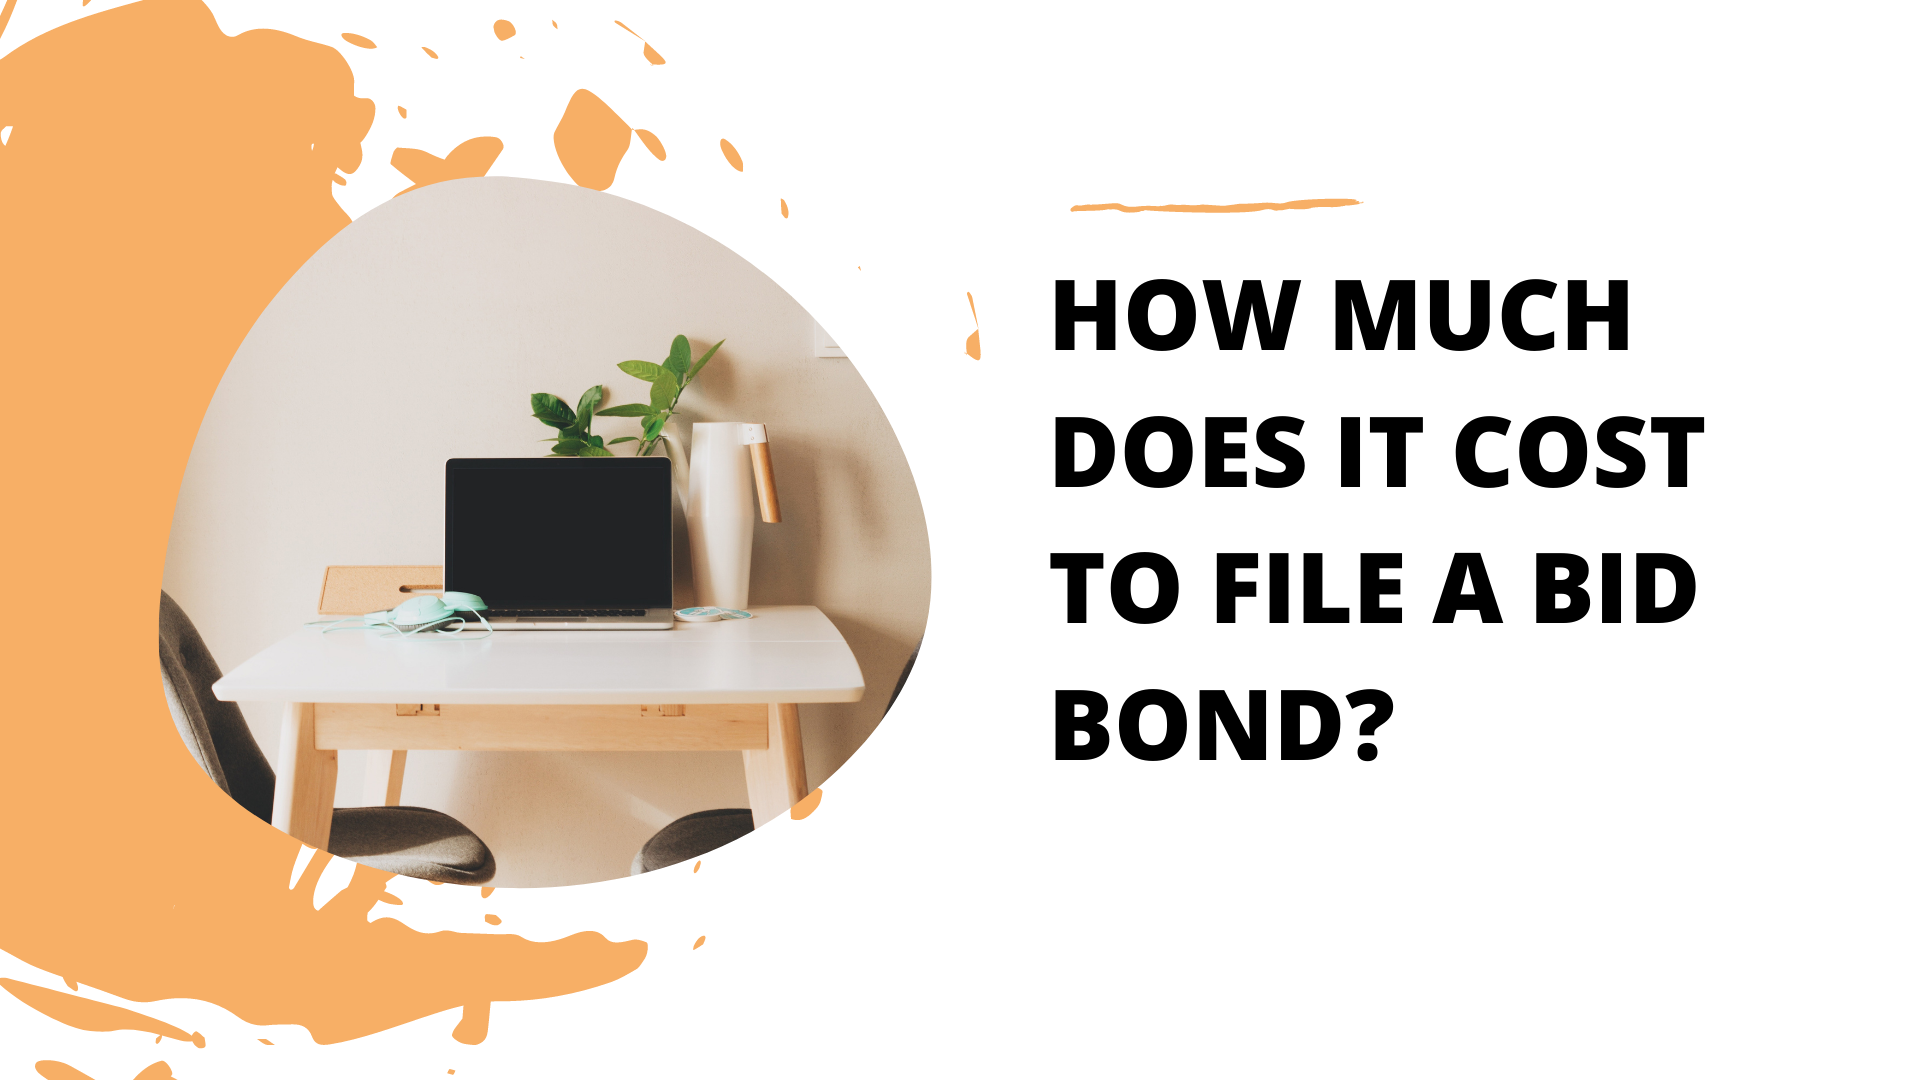 performance bond - How to get performance bonds? - work space